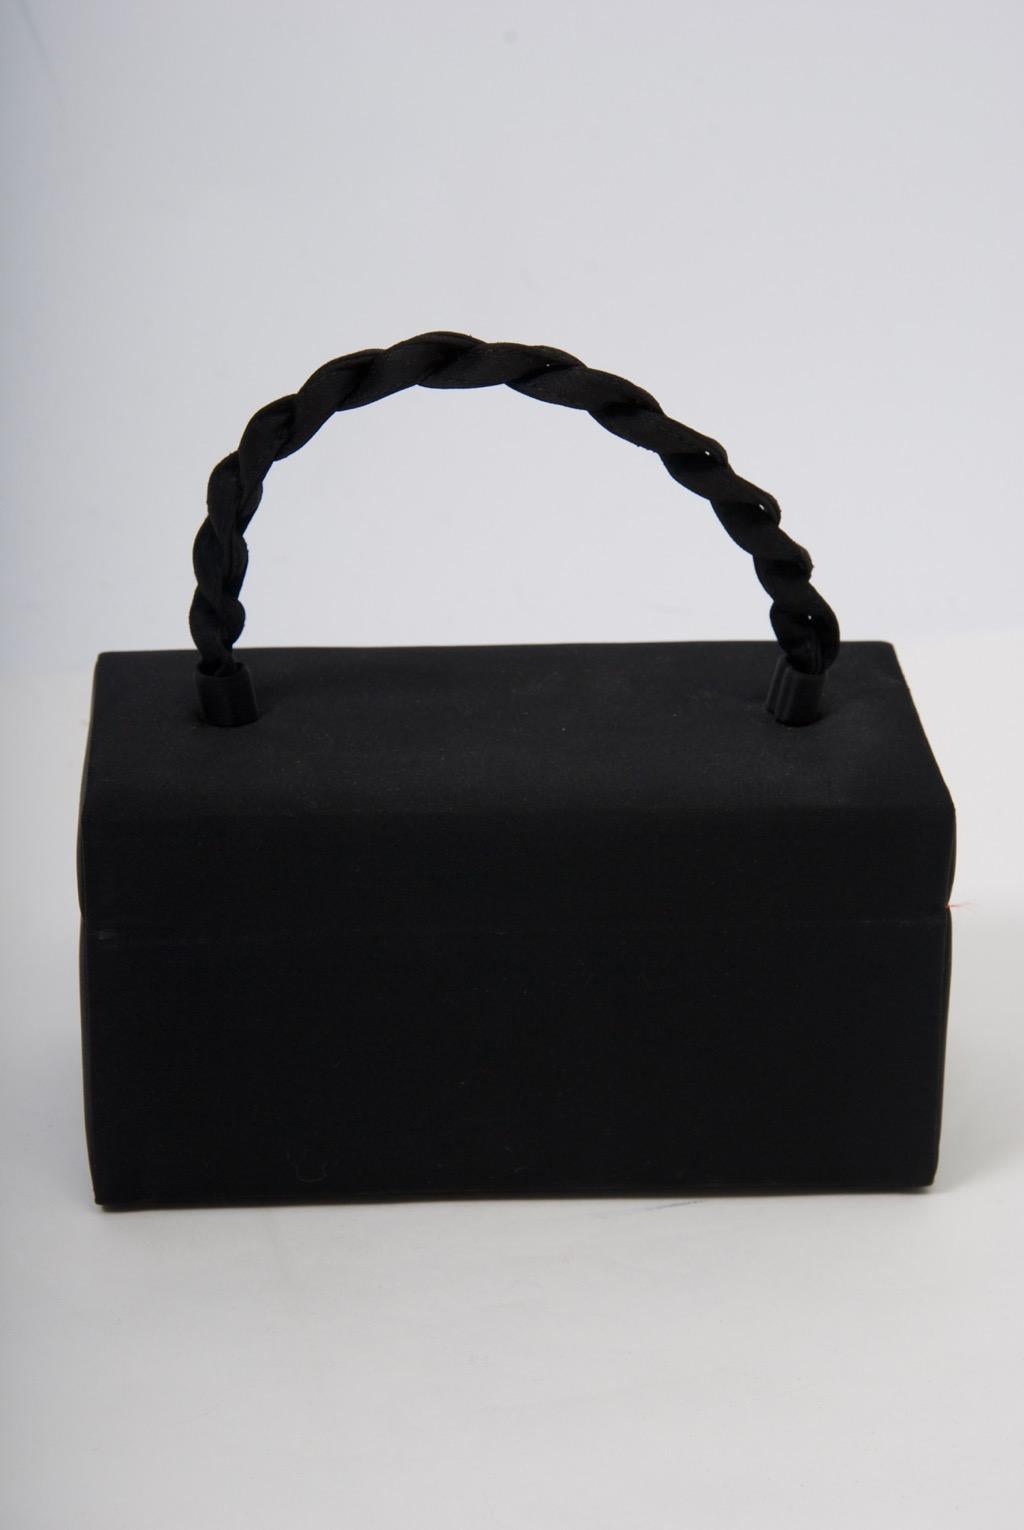 1960s Ingber box-shaped bag in black featuring a rope top handle and a jeweled clasp. Open to reveal a red interior with side compartment. Plenty of room for phone and essentials.